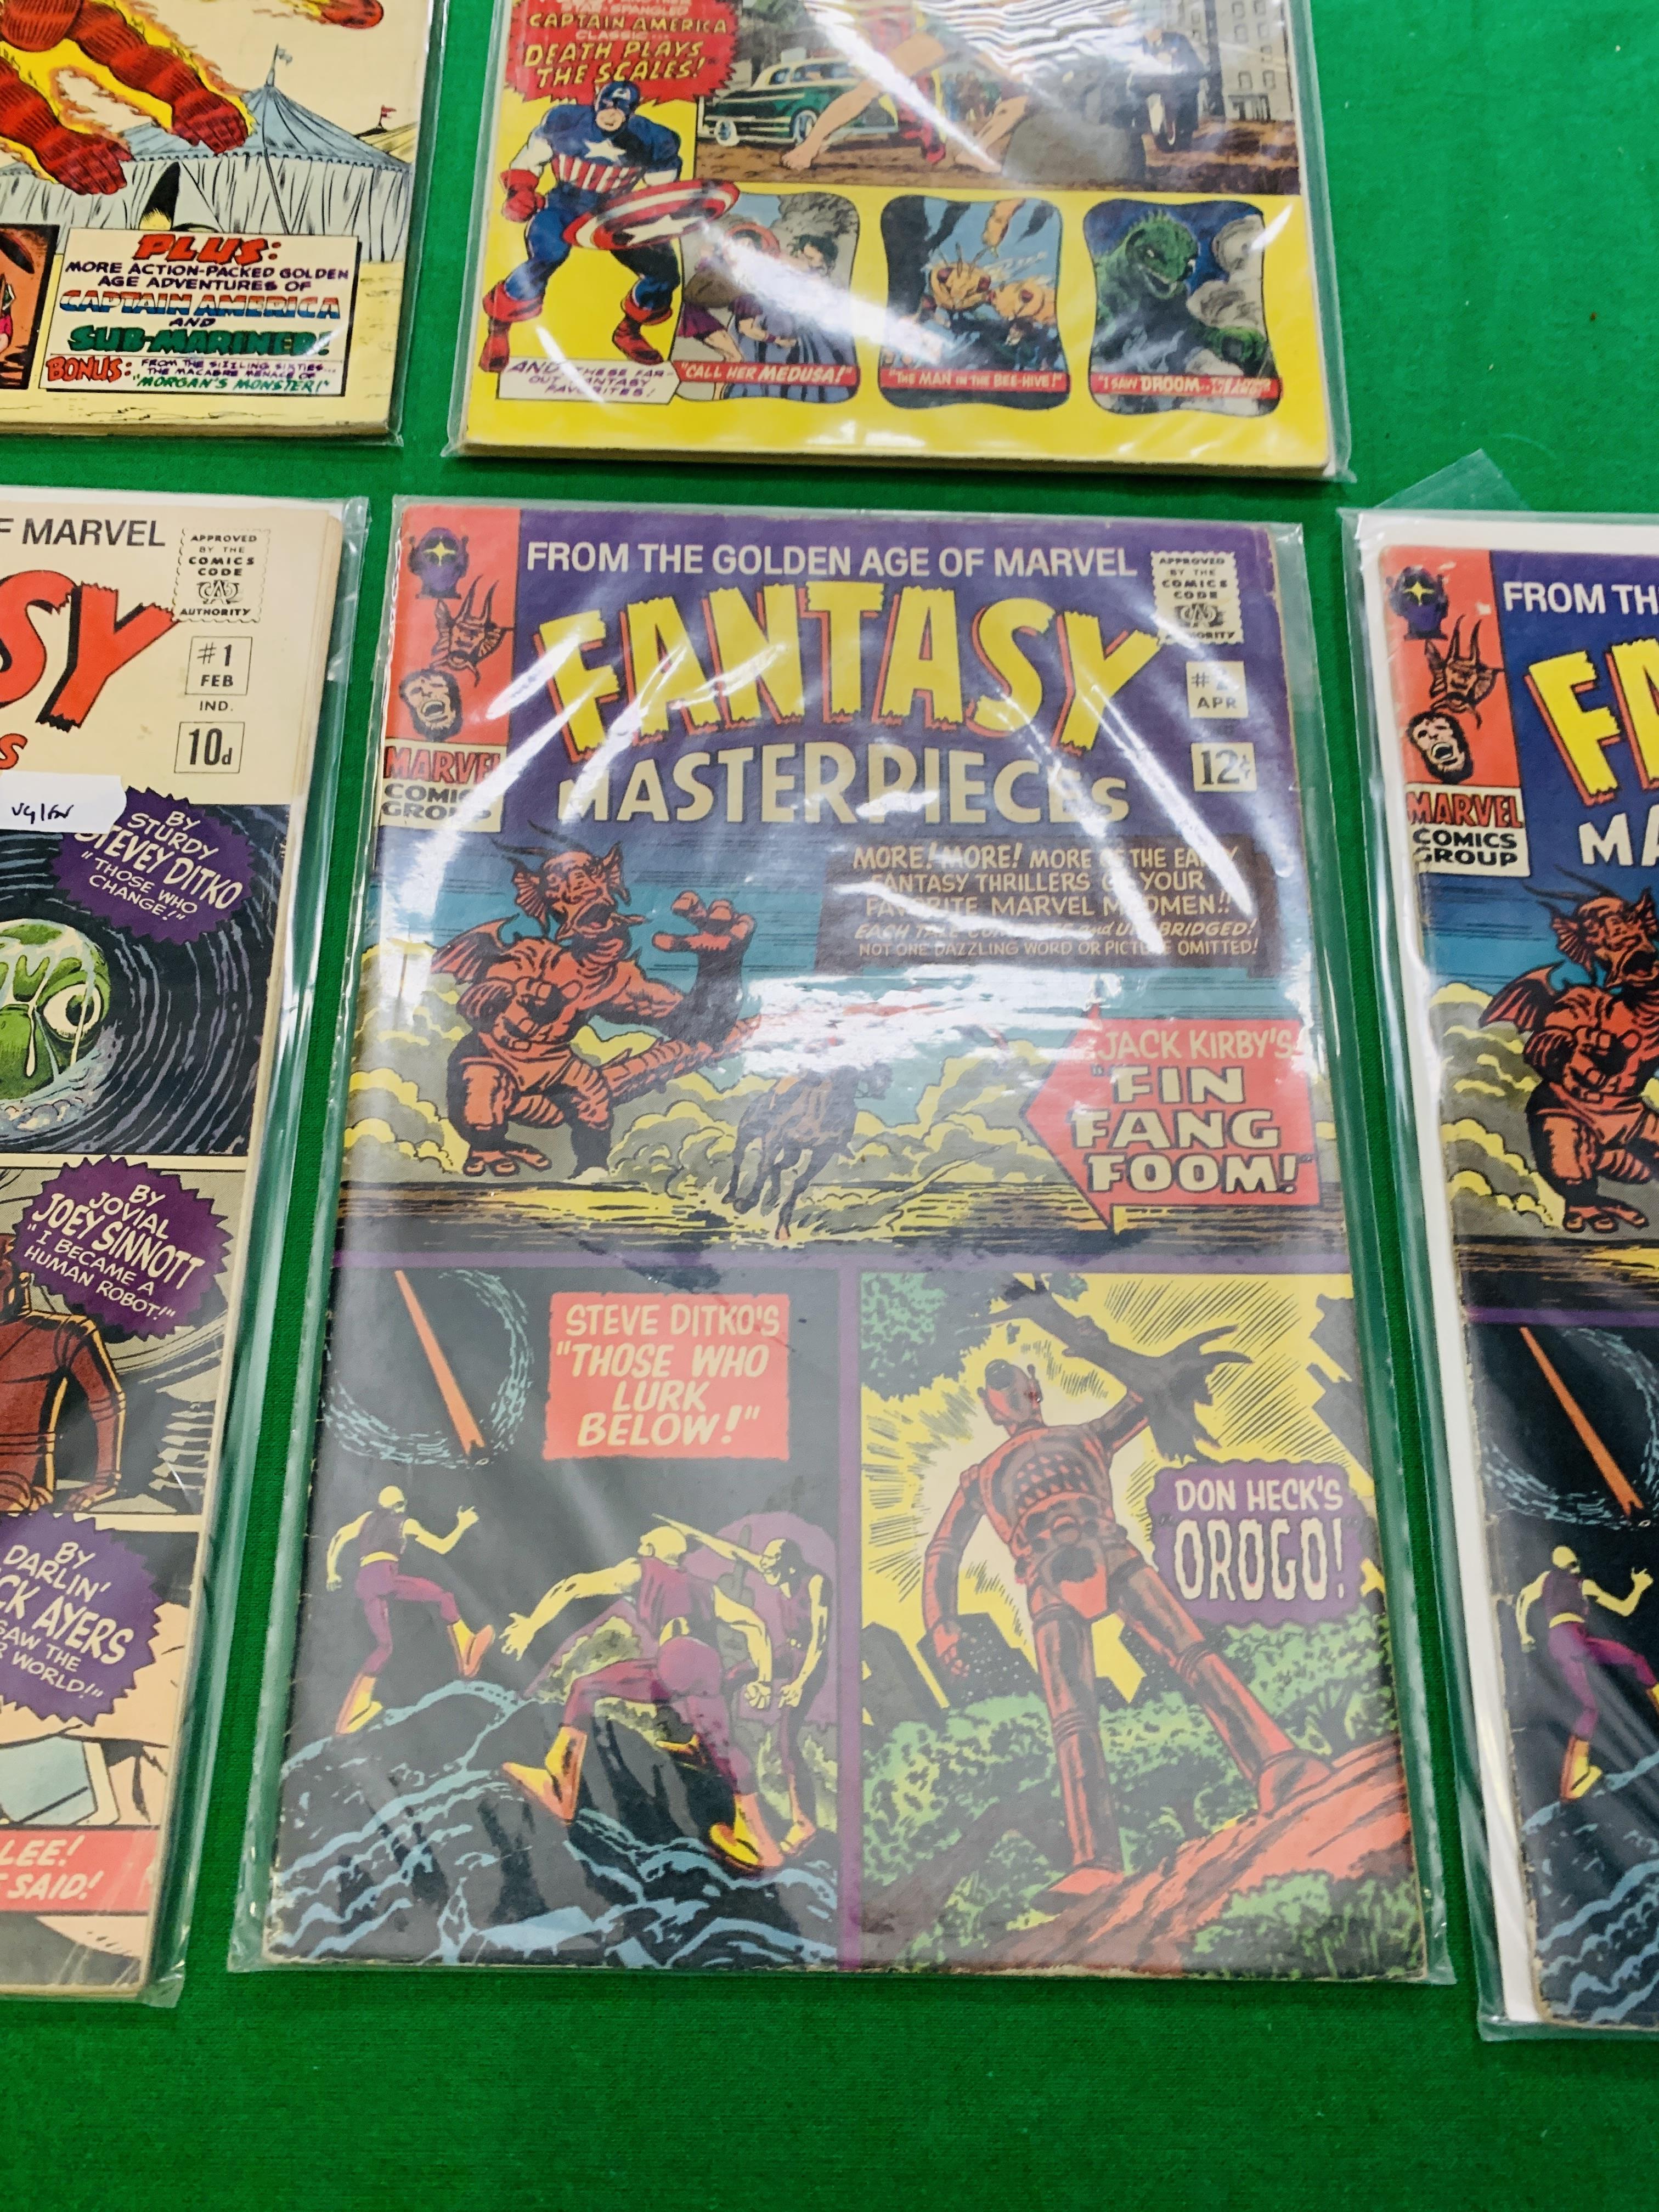 MARVEL COMICS FANTASY MASTERPIECES NO. 1, 2, 2, 5, 8, 10, 11, FROM 1966. - Image 3 of 8